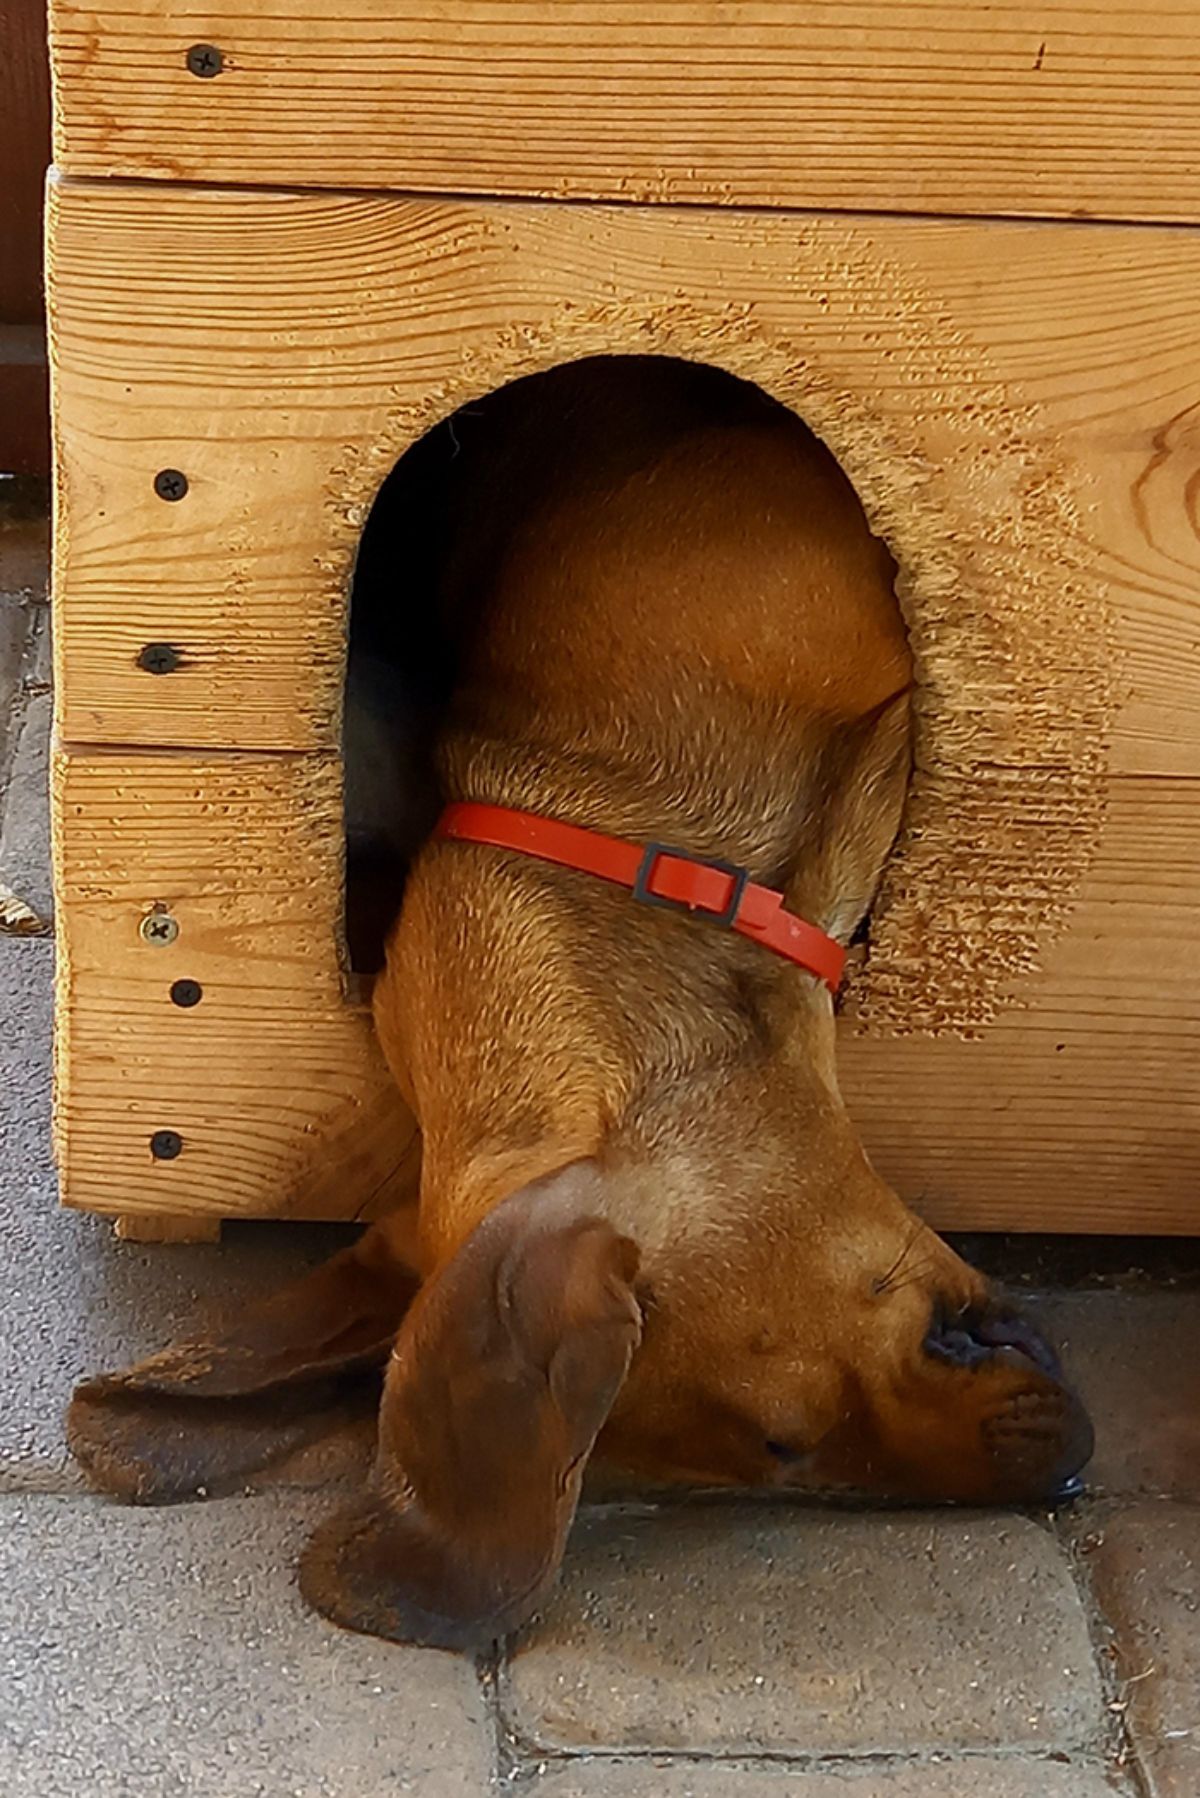 brown dog sleeping with the head resting on the floor with the rest of the body inside a wooden doghouse